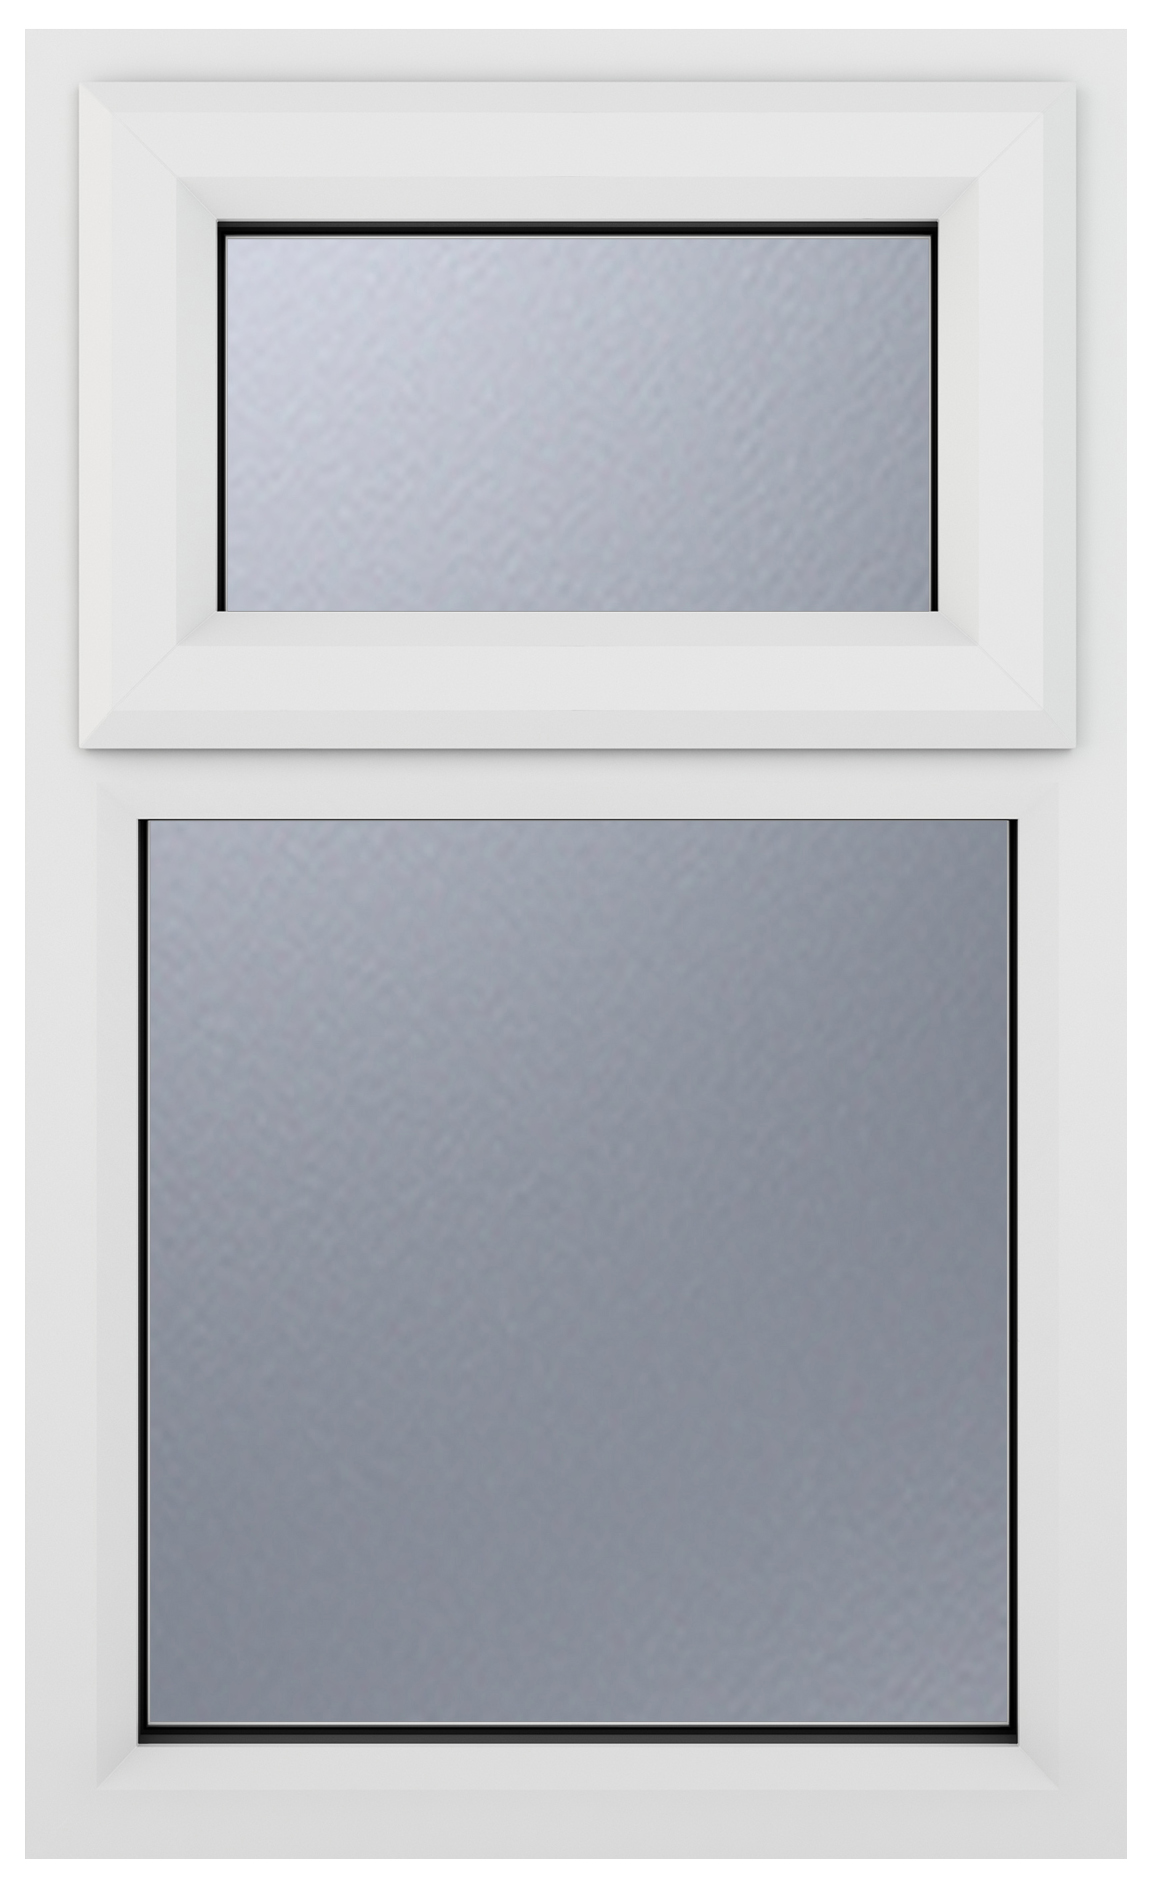 Crystal uPVC White Top Hung Opener Obscure Double Glazed Fixed Light Window - 610 x 820mm